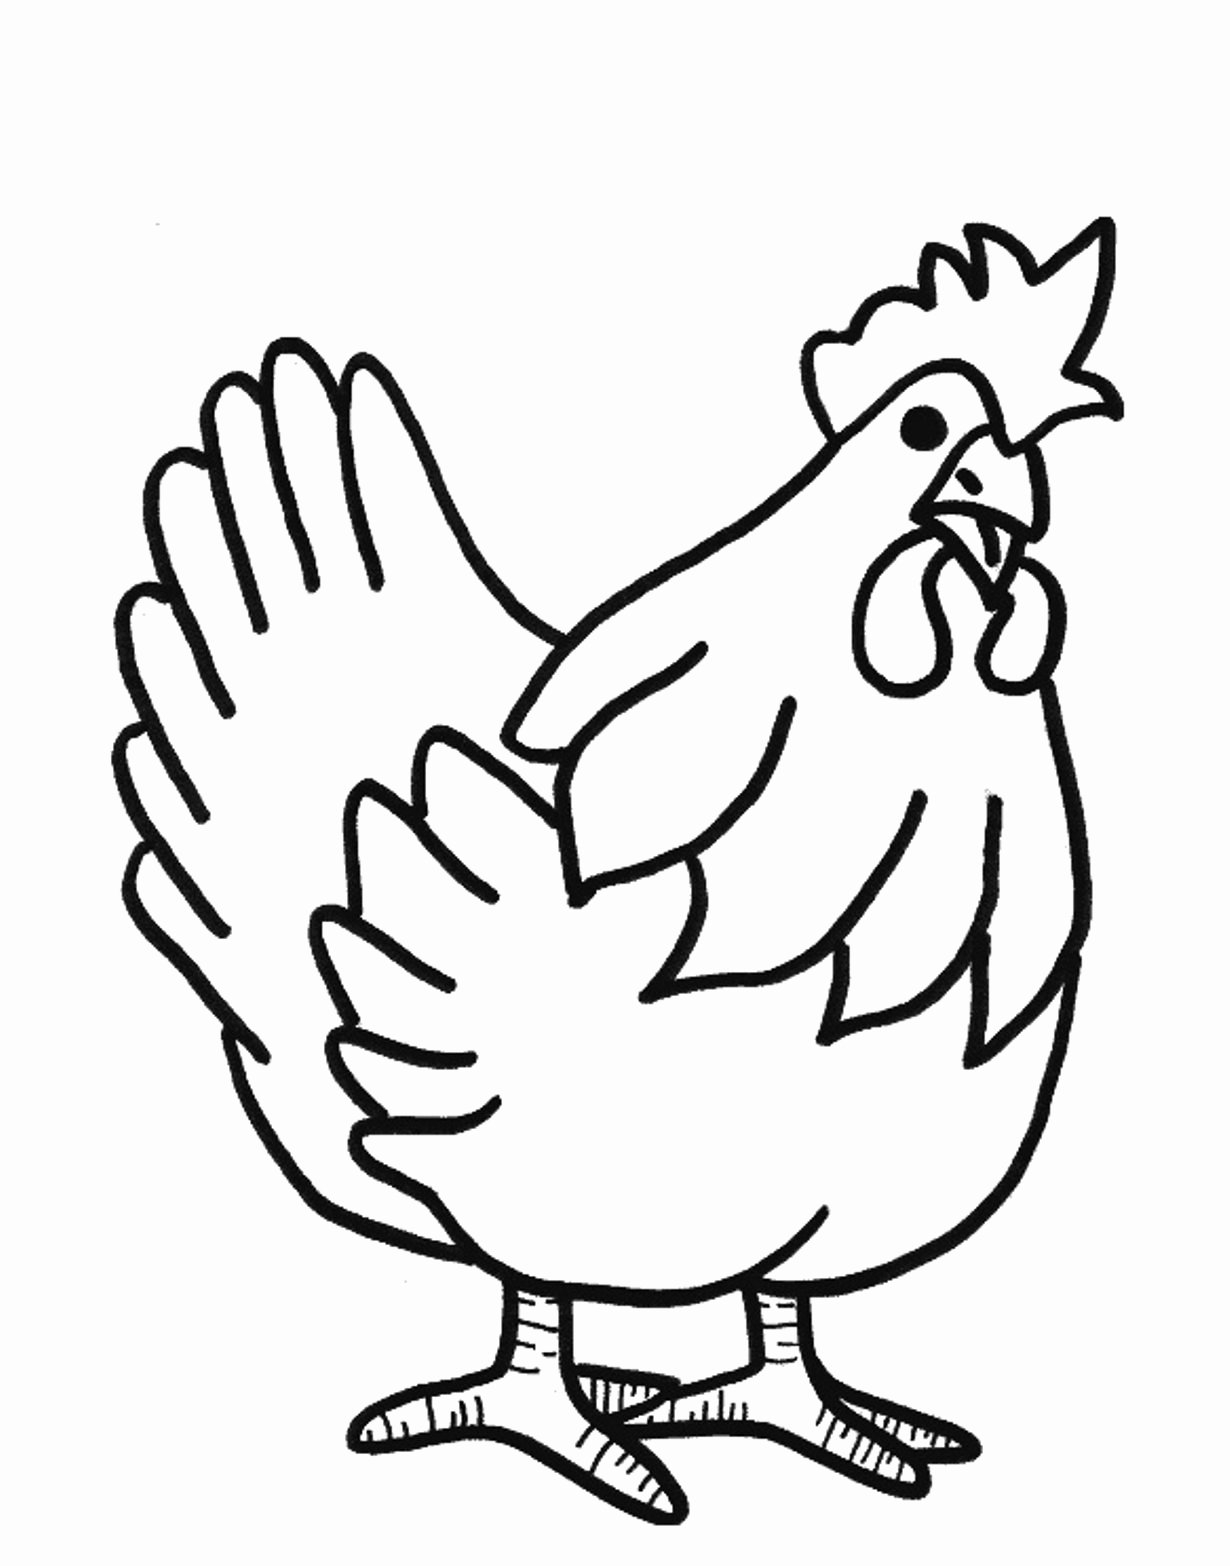 The Little Red Hen Coloring Pages Coloring Pages Best Of Little Red Hen Coloring Pages Page Farm